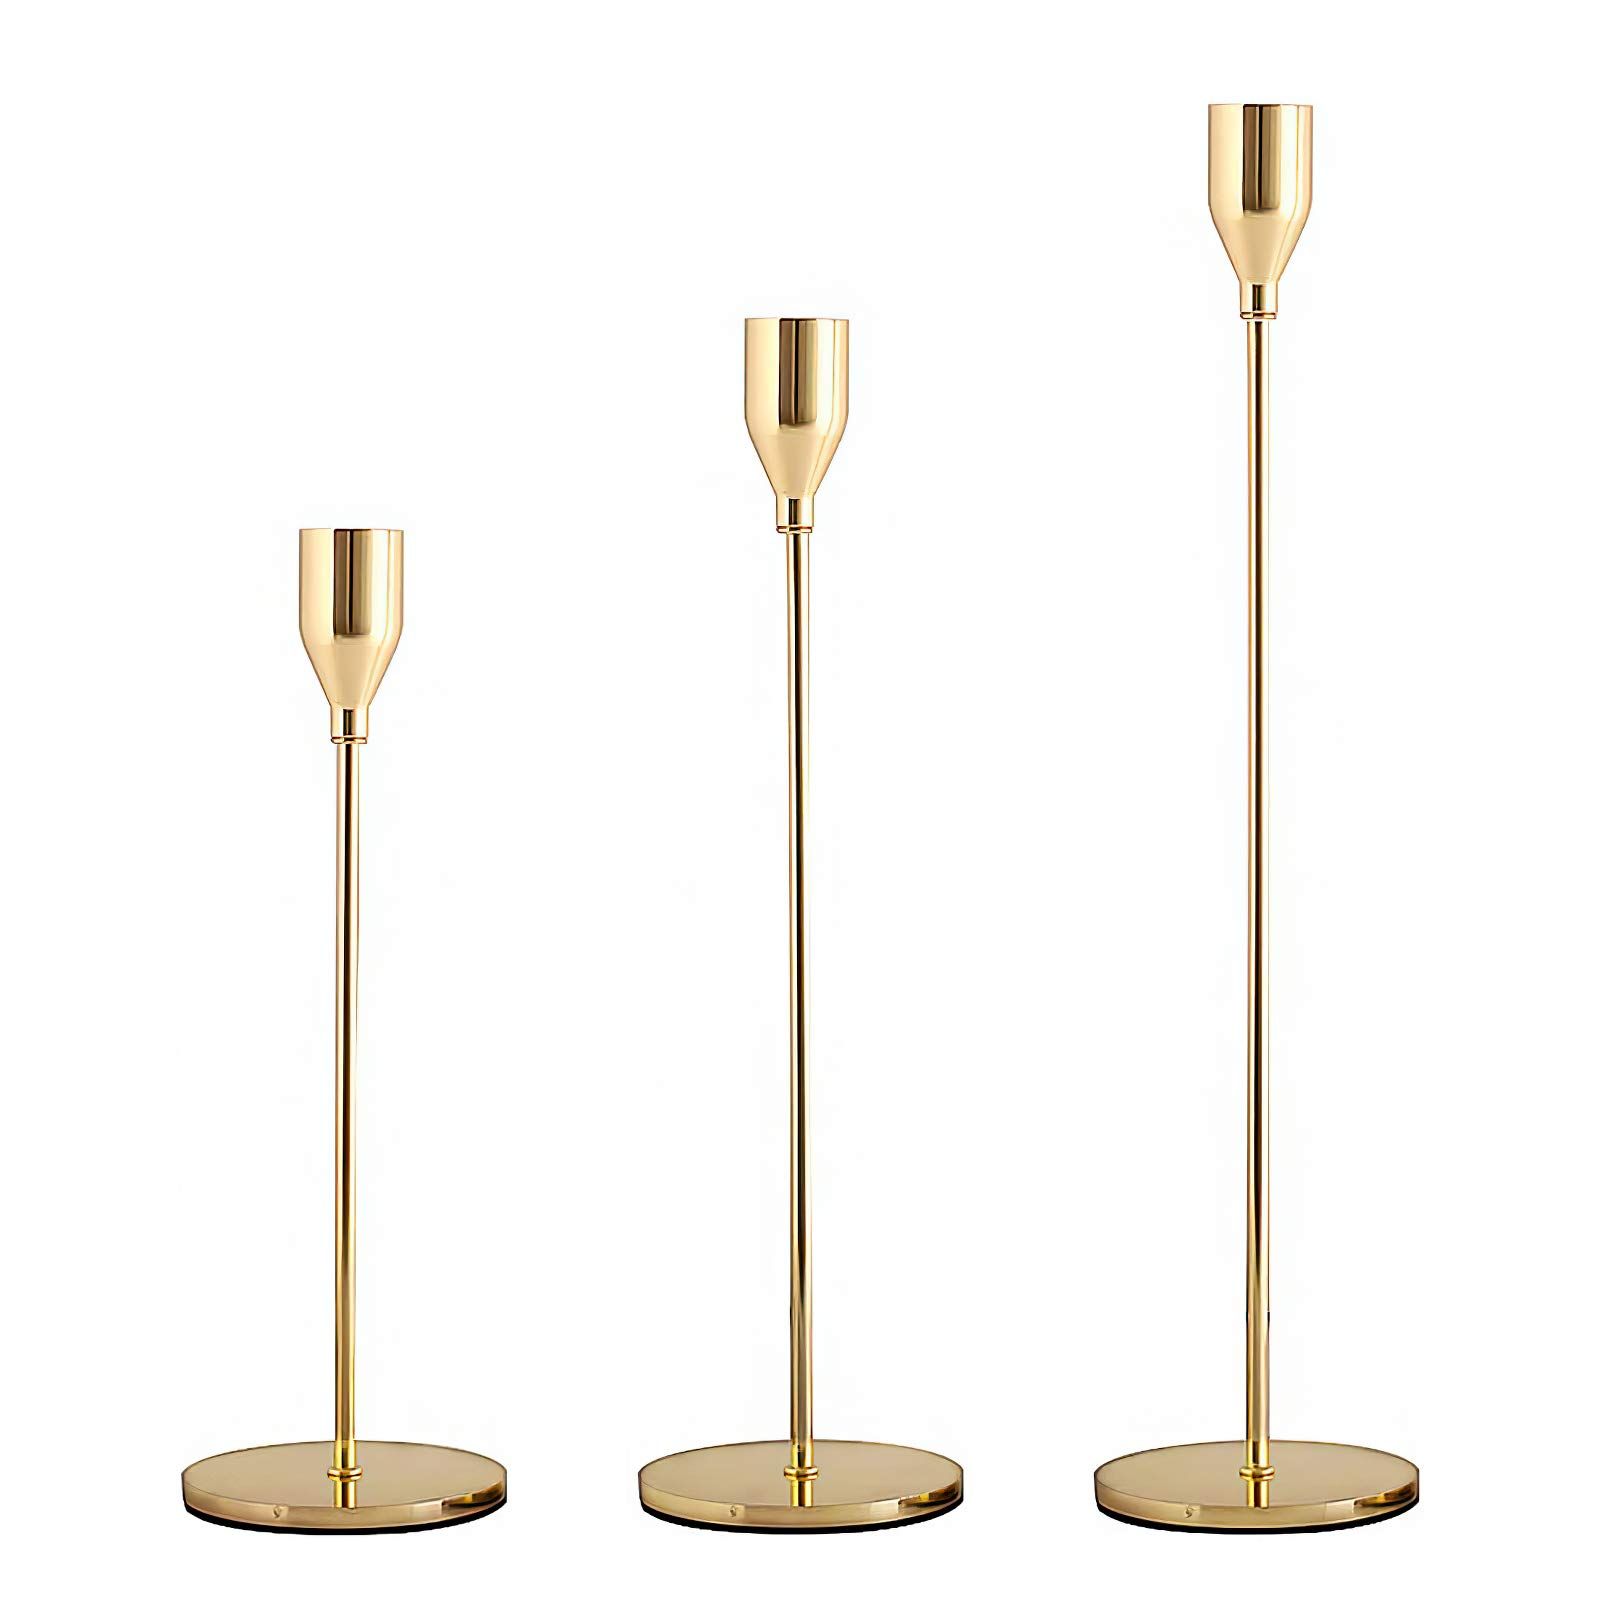 SHIONSON Gold Candlestick Holders Set of 3 for Taper Candles,Table Decorative Metal Candle Holders f | Amazon (US)